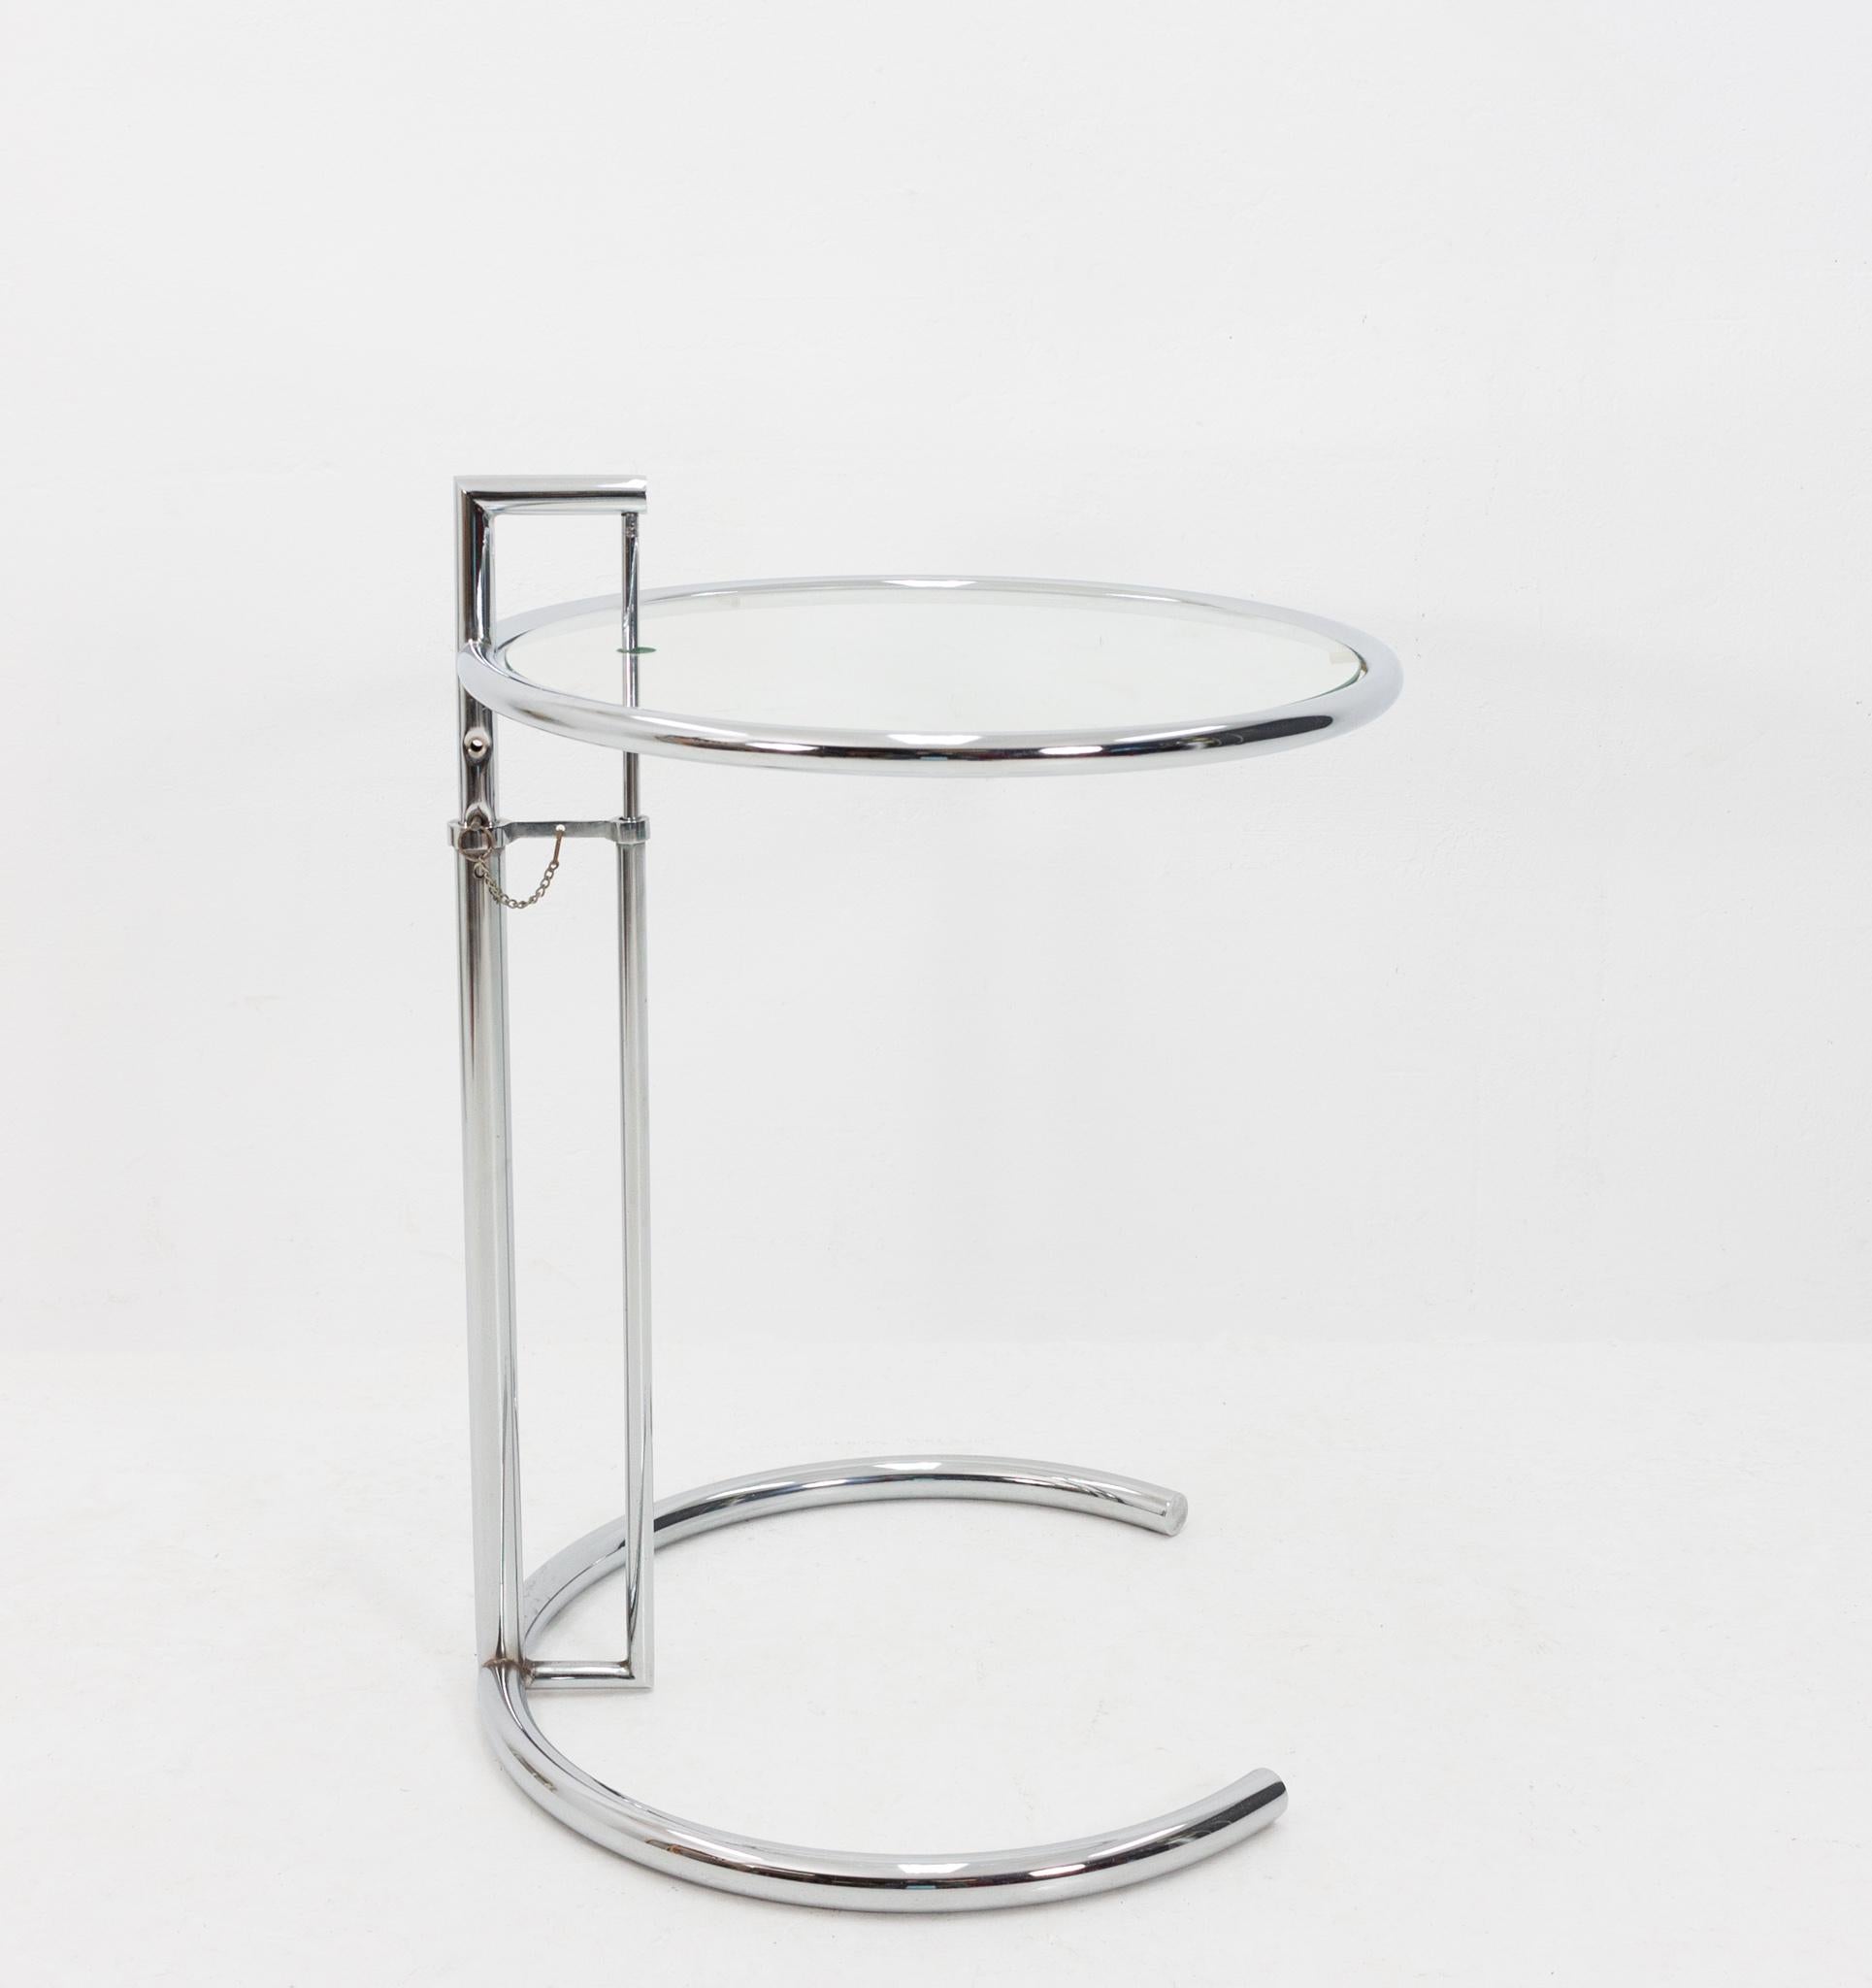 French Eileen Gray Adjustable Chrome Coffee Table E 1027